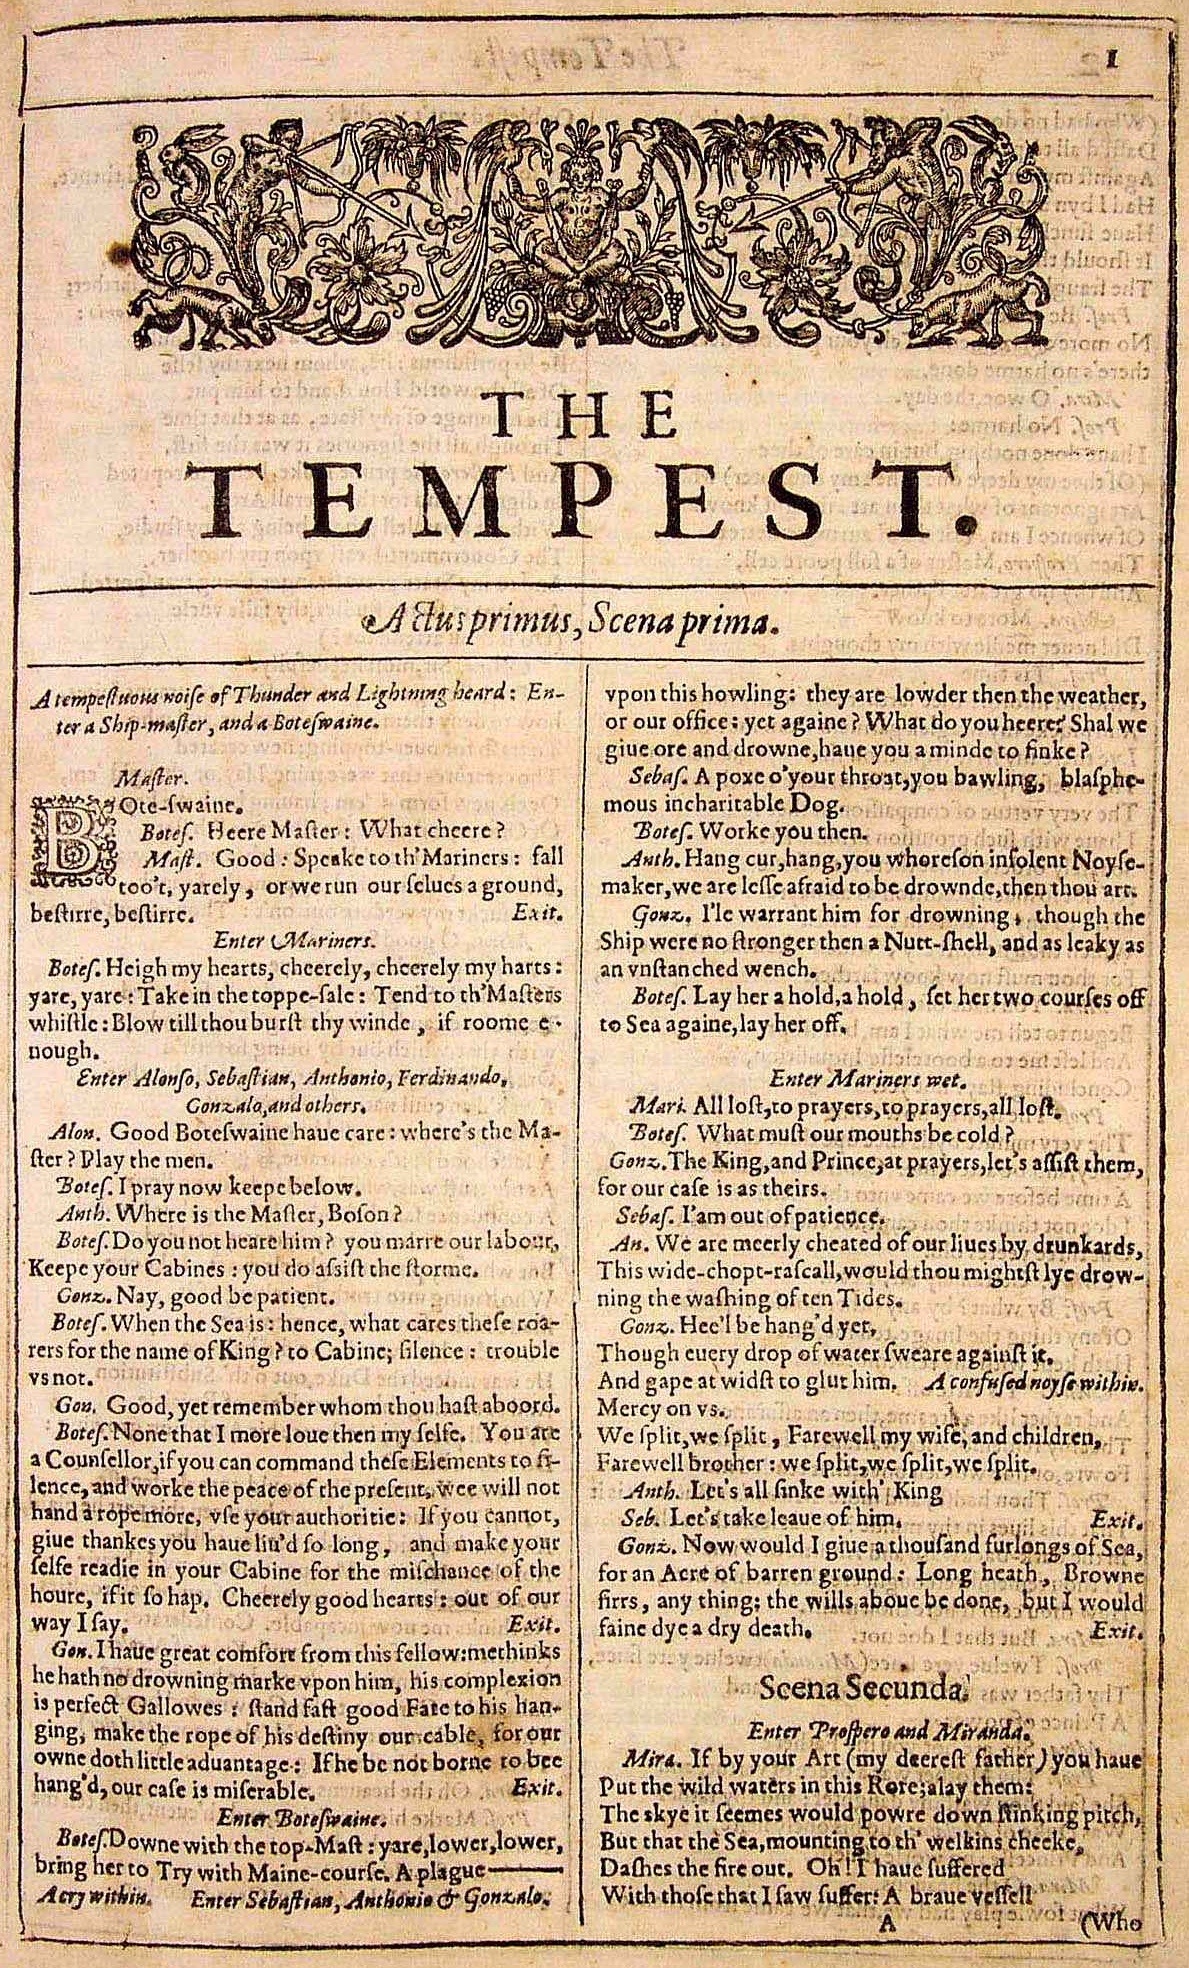 The Tempest, title page